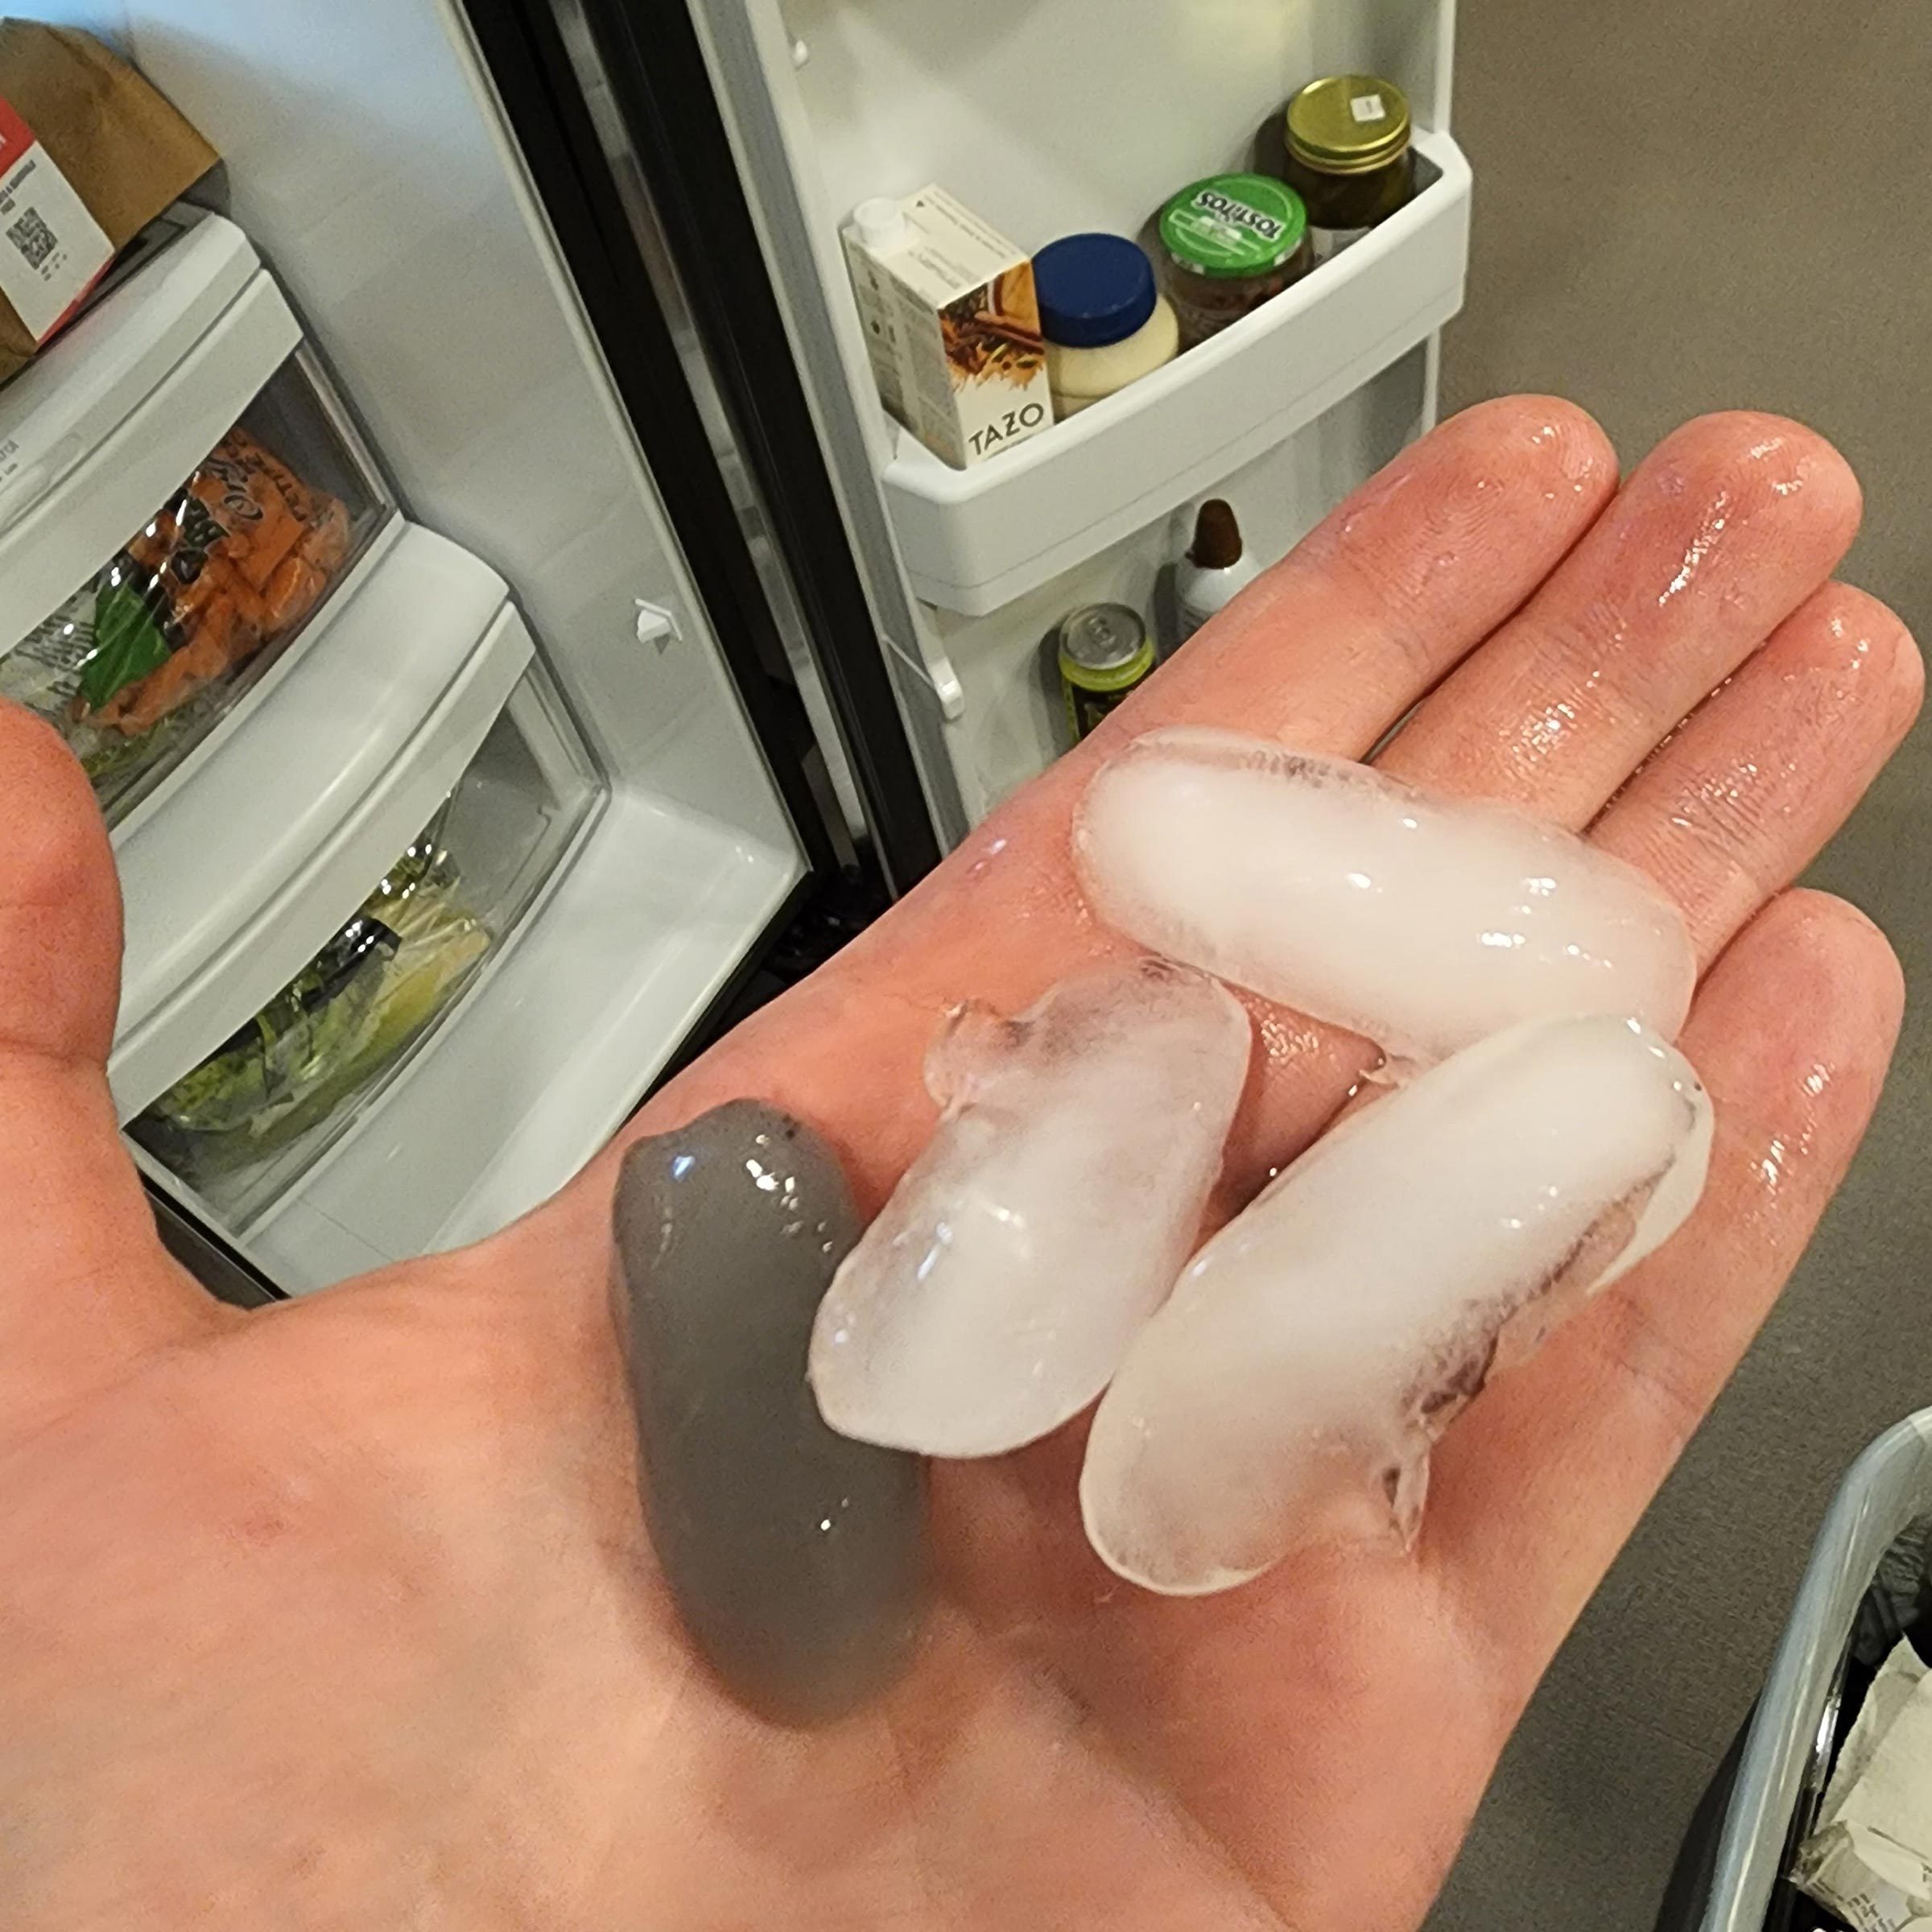 If You See Gray Ice Cubes in Your Fridge, This Is What It Means